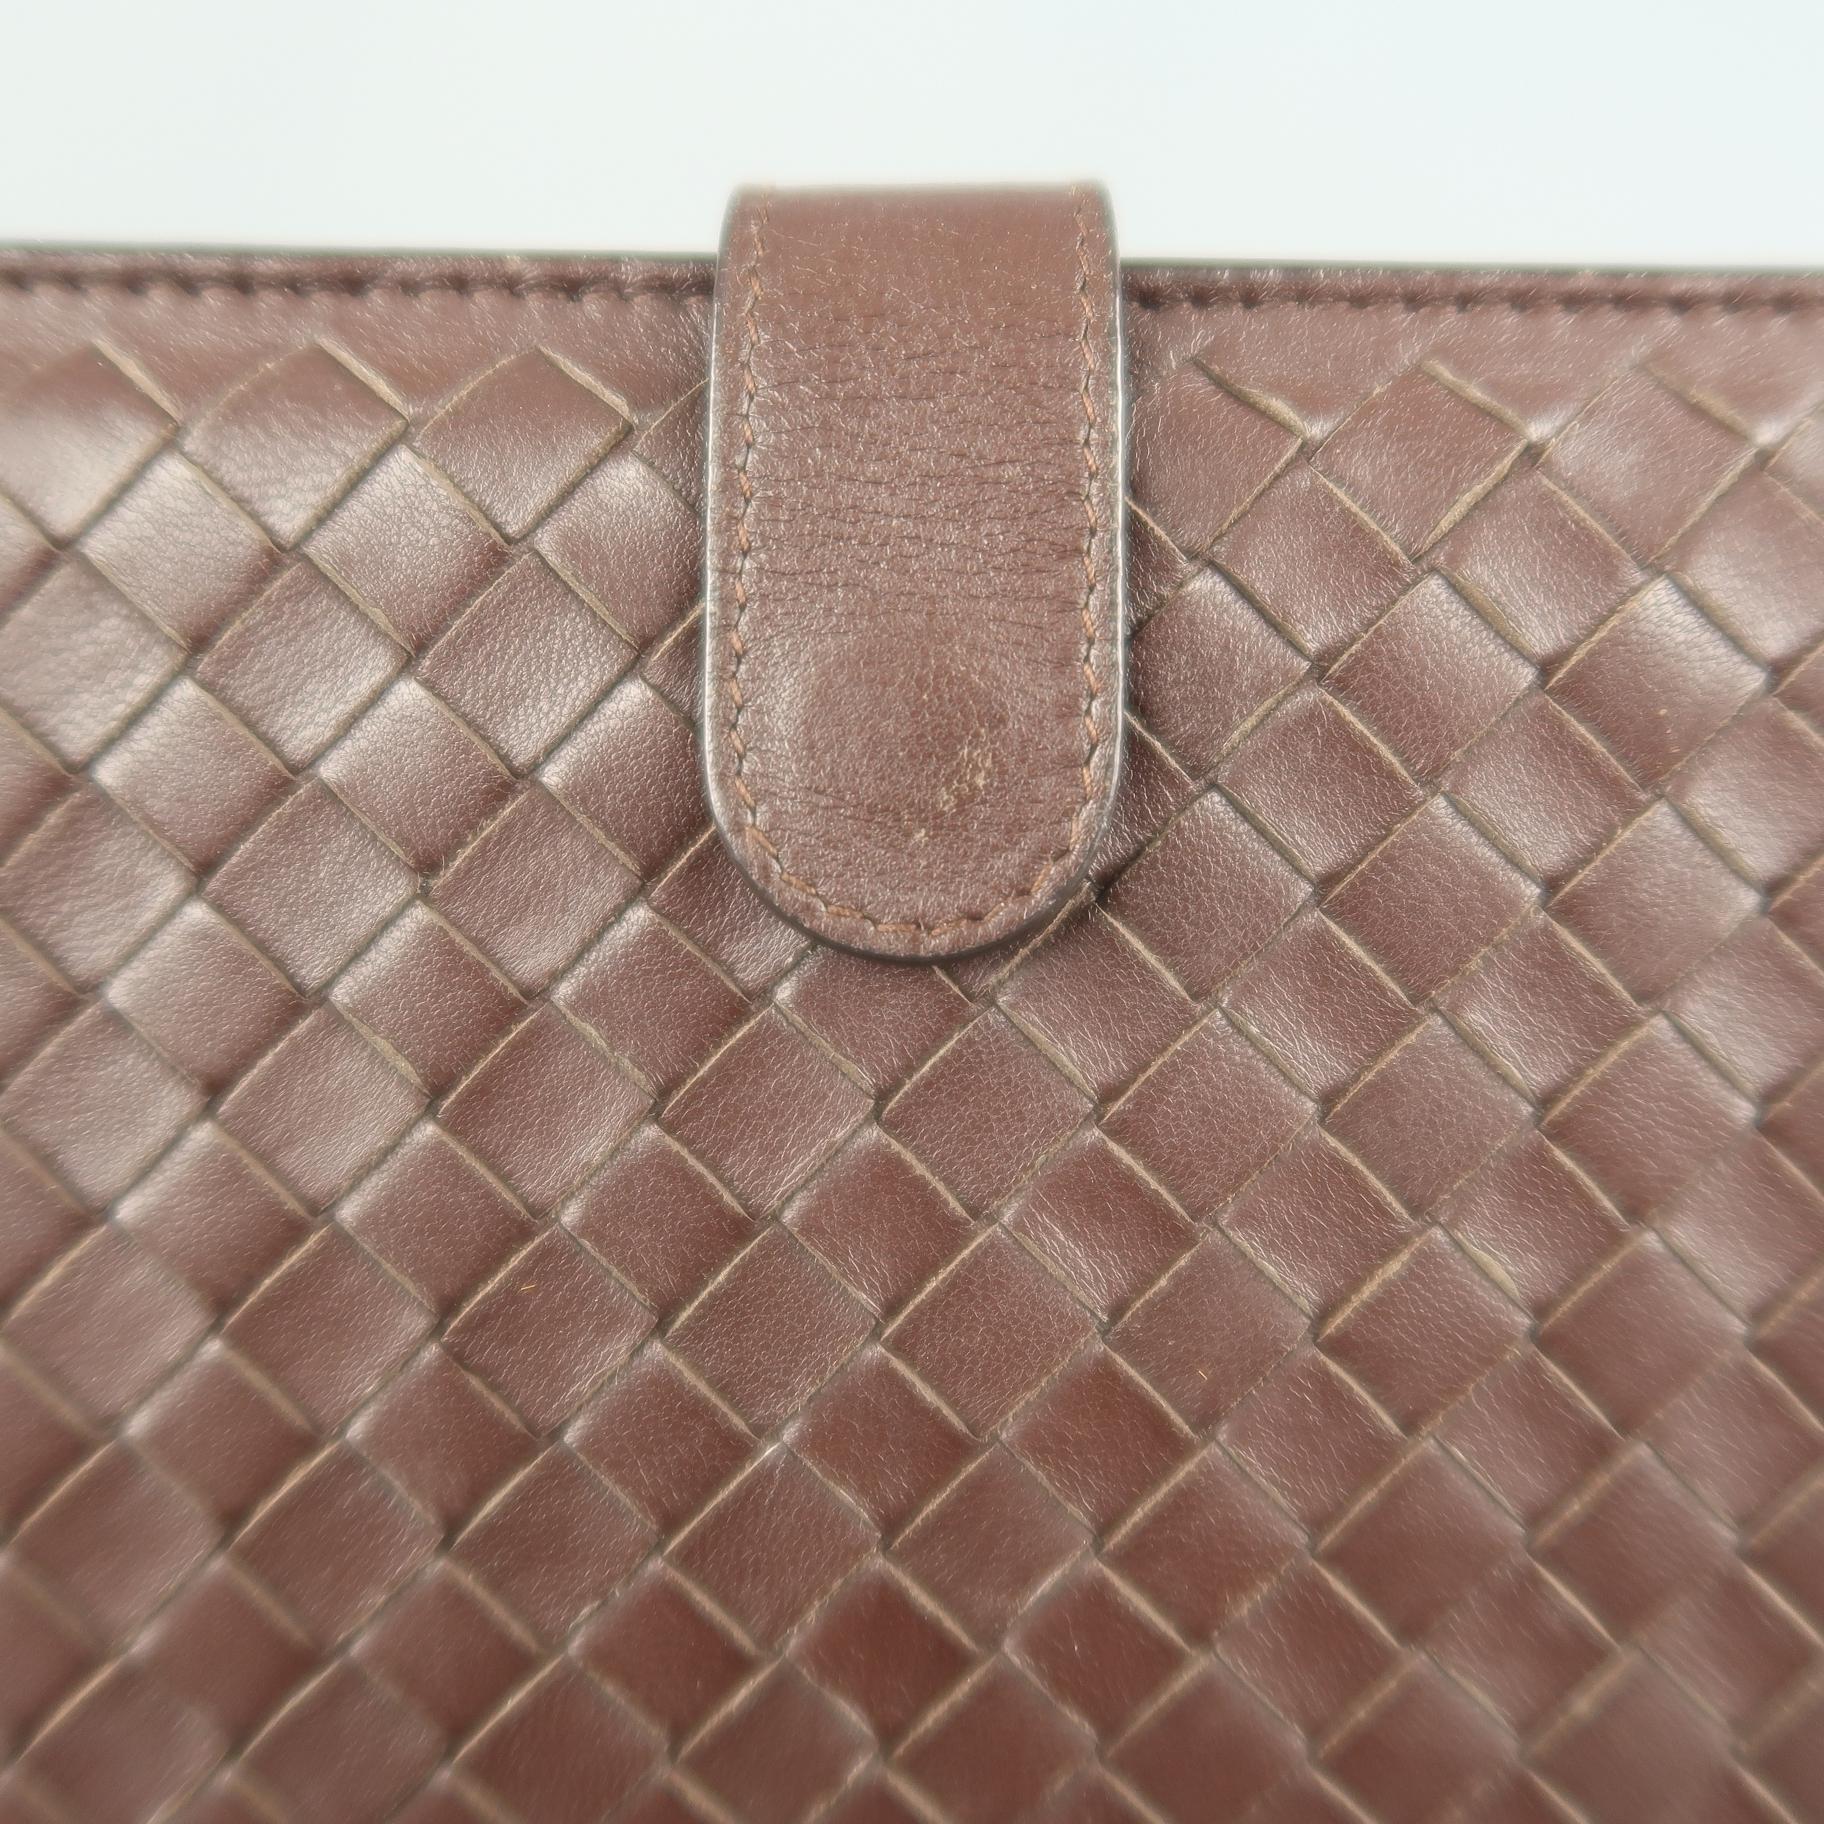 BOTTEGA VENETA tablet / iPad case circa 2011 comes in brown woven Intrecciato leather with a tab snap closure and canvas interior. Made in Italy.
 
Very Good Pre-Owned Condition.
 
10.5 x 8.25 in.